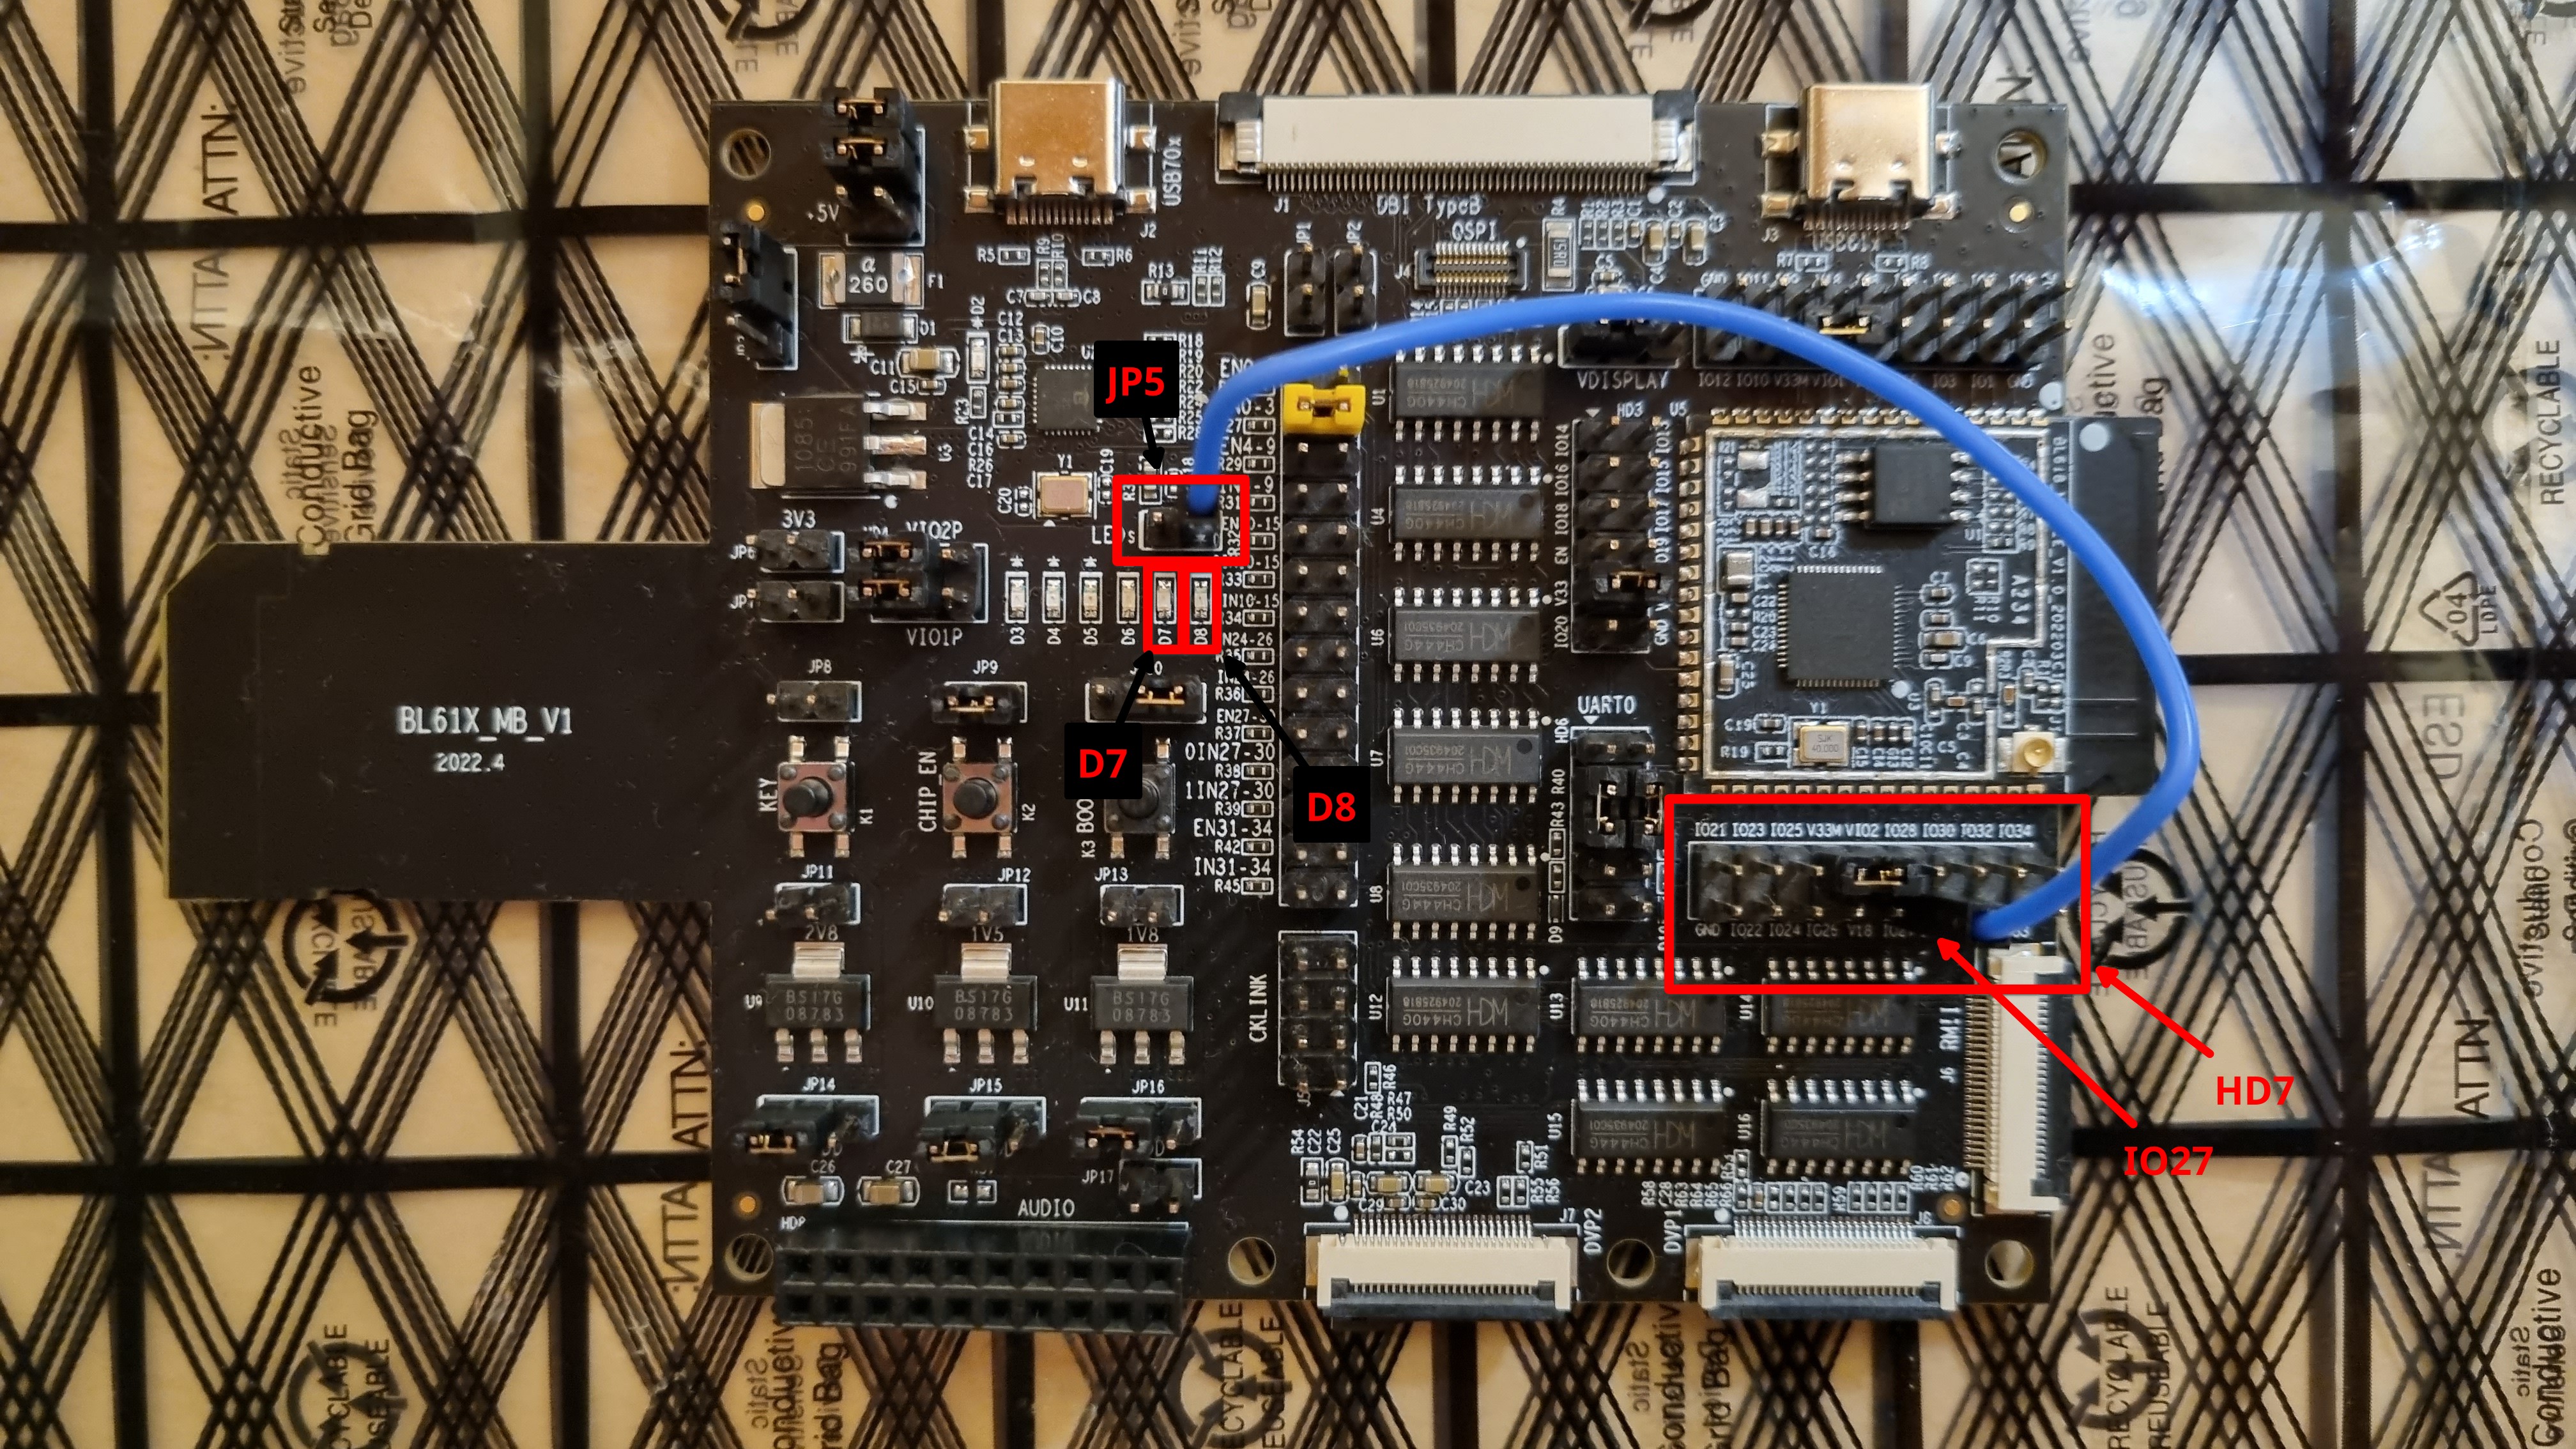 Connect D8 to GPIO27